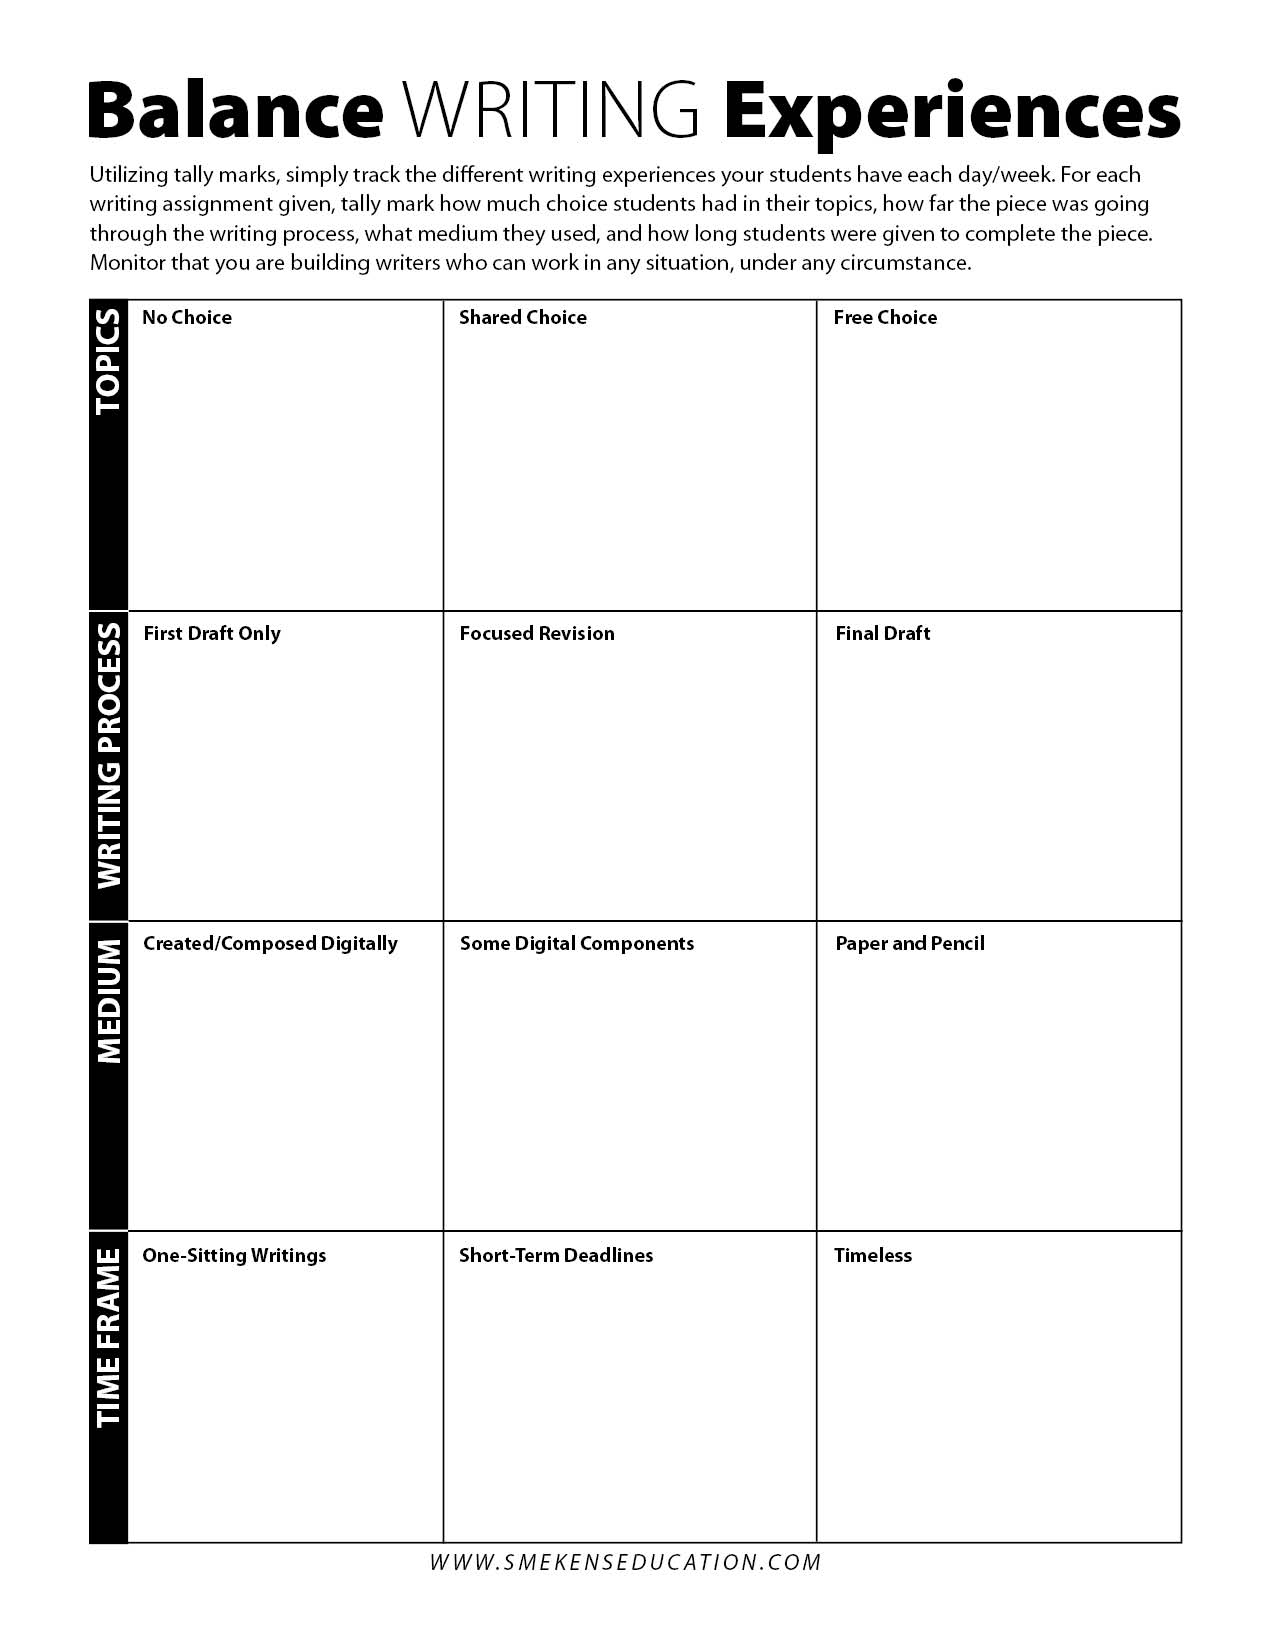 Tracking Student Writing Experiences - Form Template